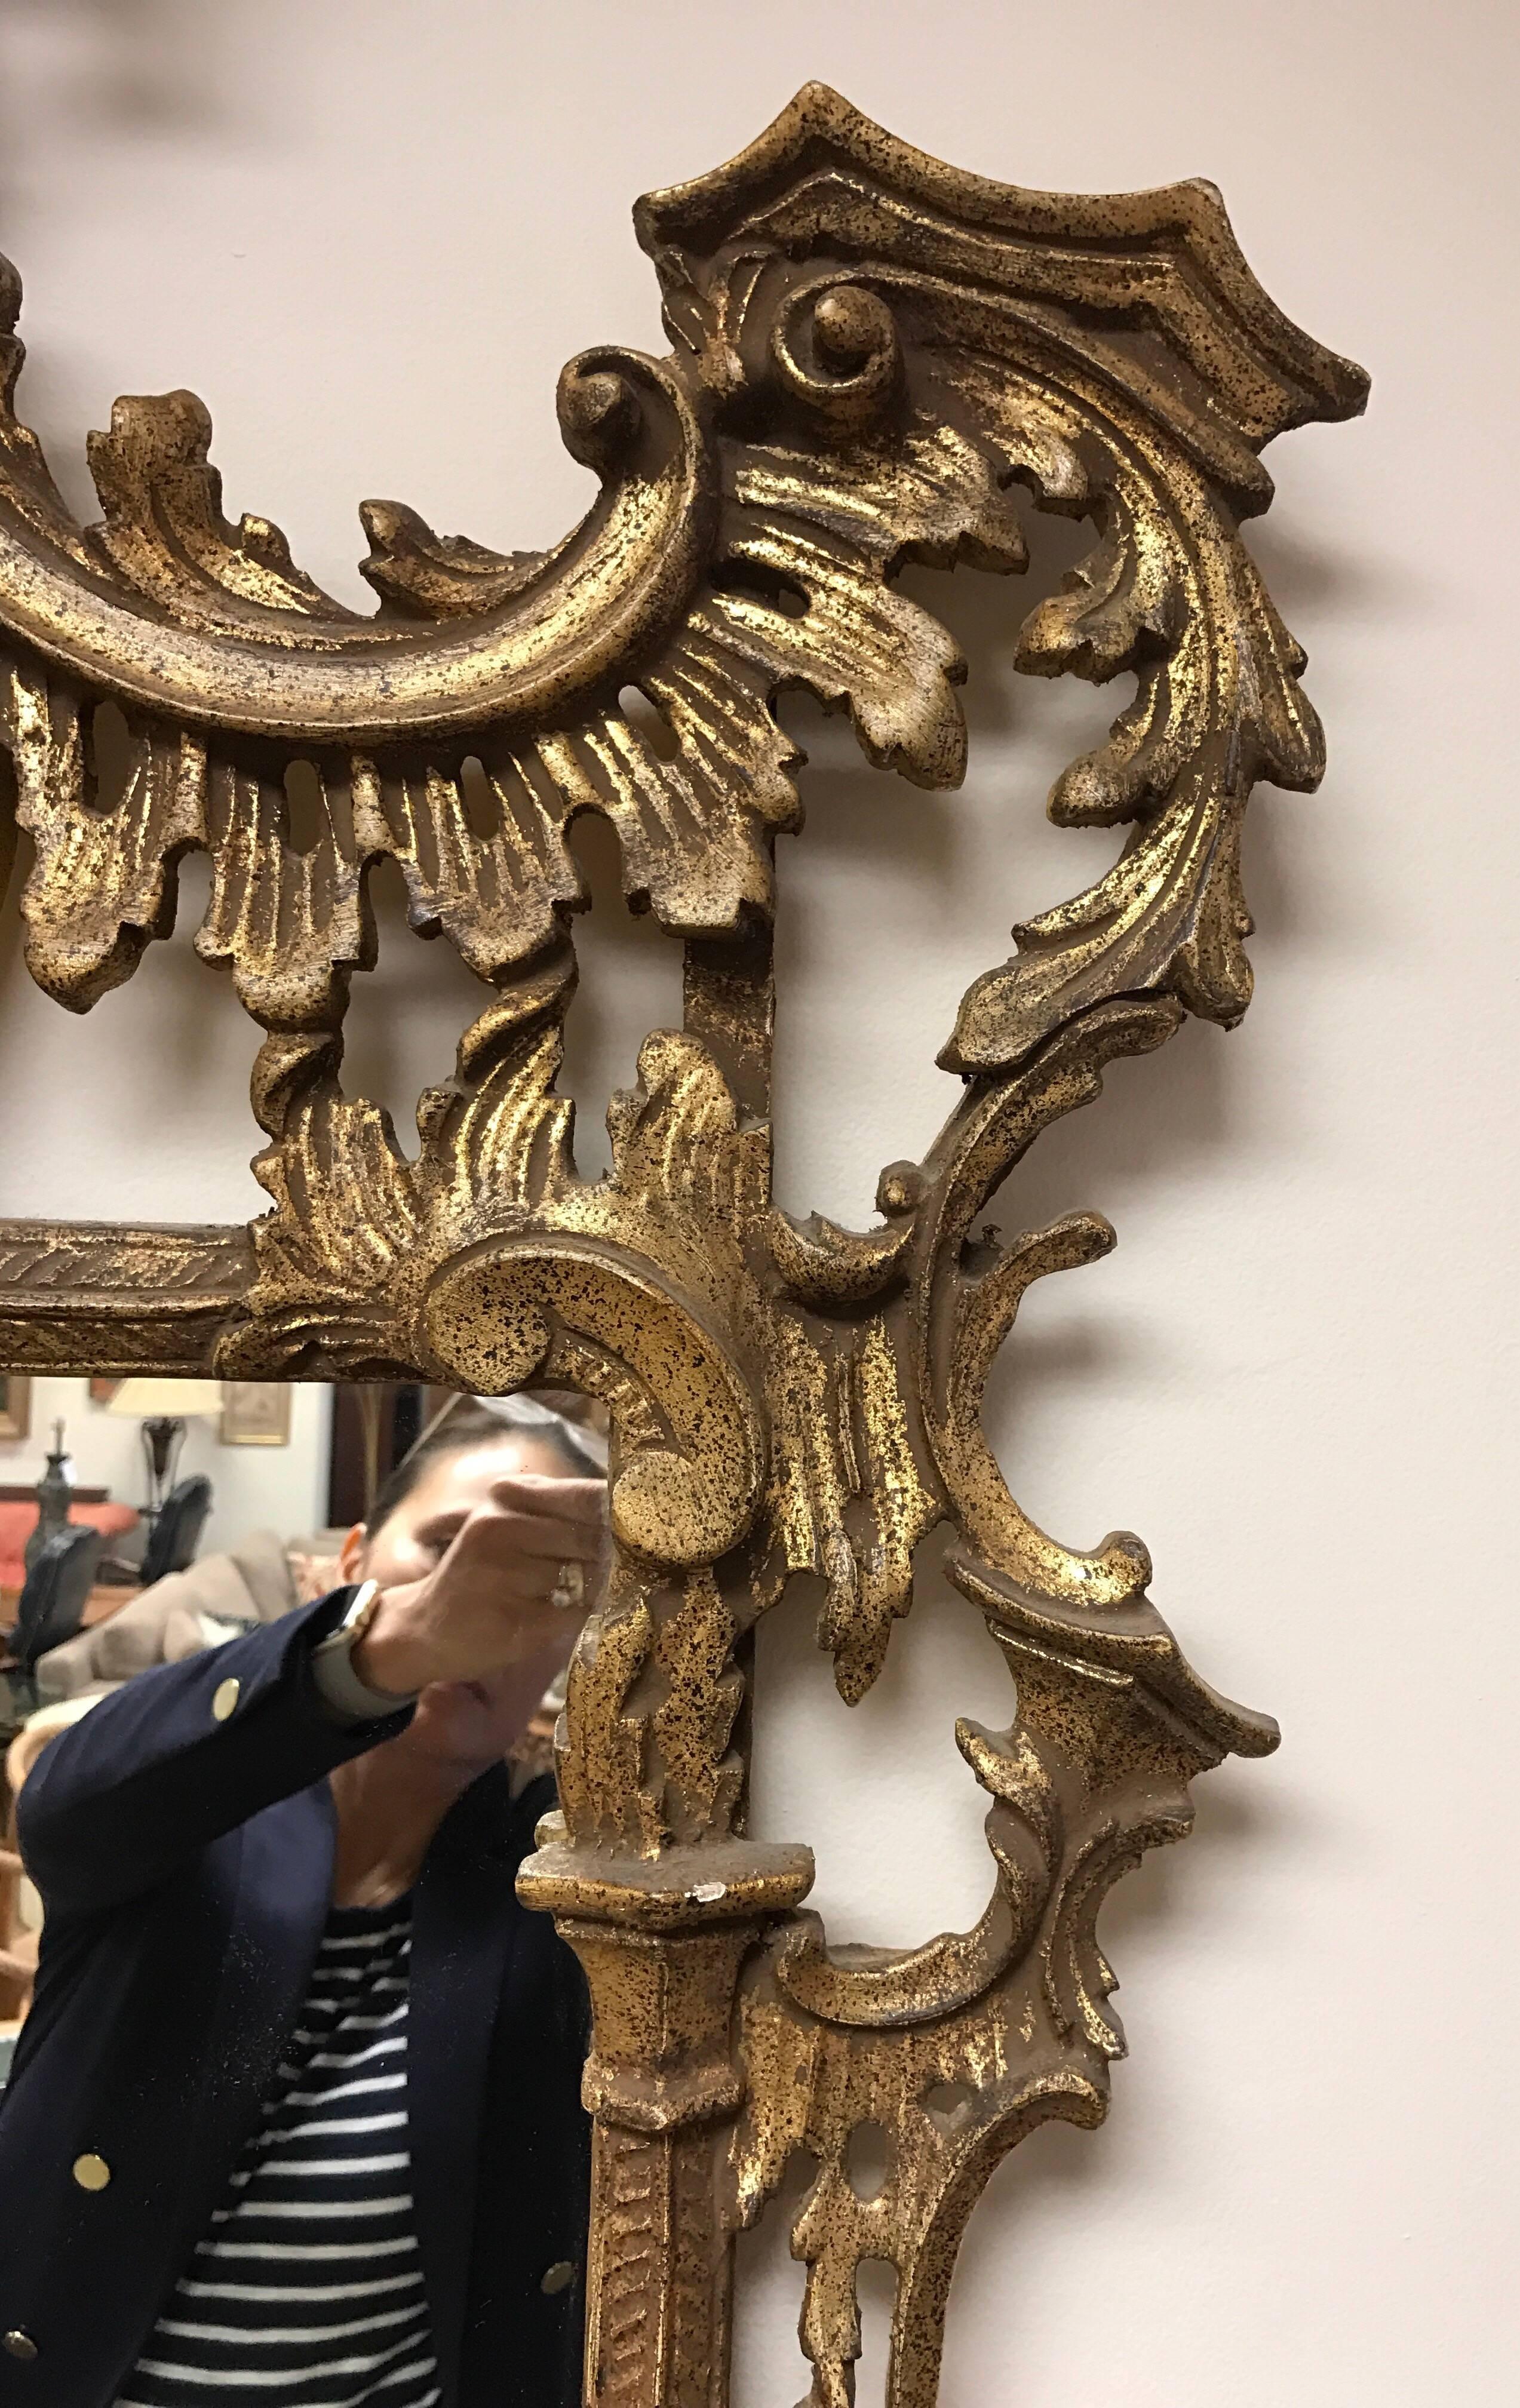 mirror made in italy